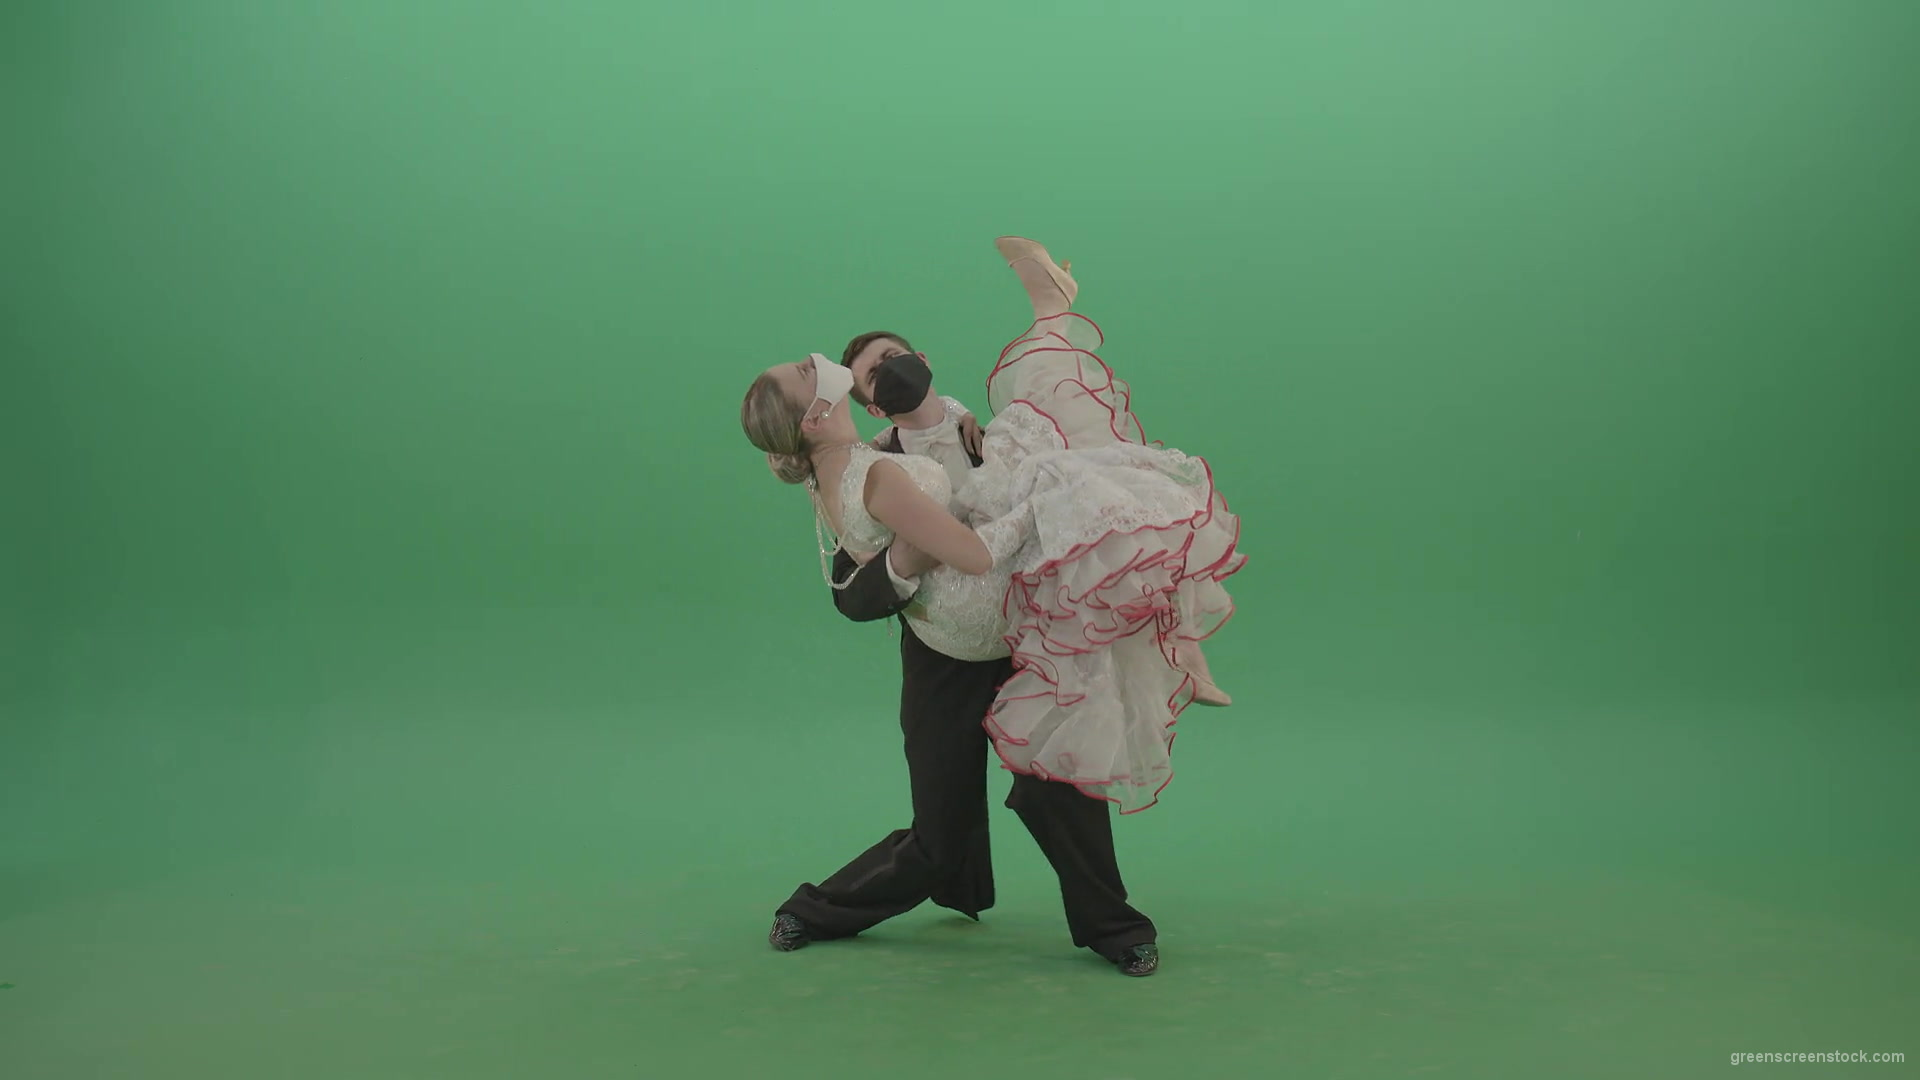 Funny-Man-in-Covid-19-mask-can-not-hold-classic-wife-on-green-screen-4K-Video-Footage-1920_007 Green Screen Stock